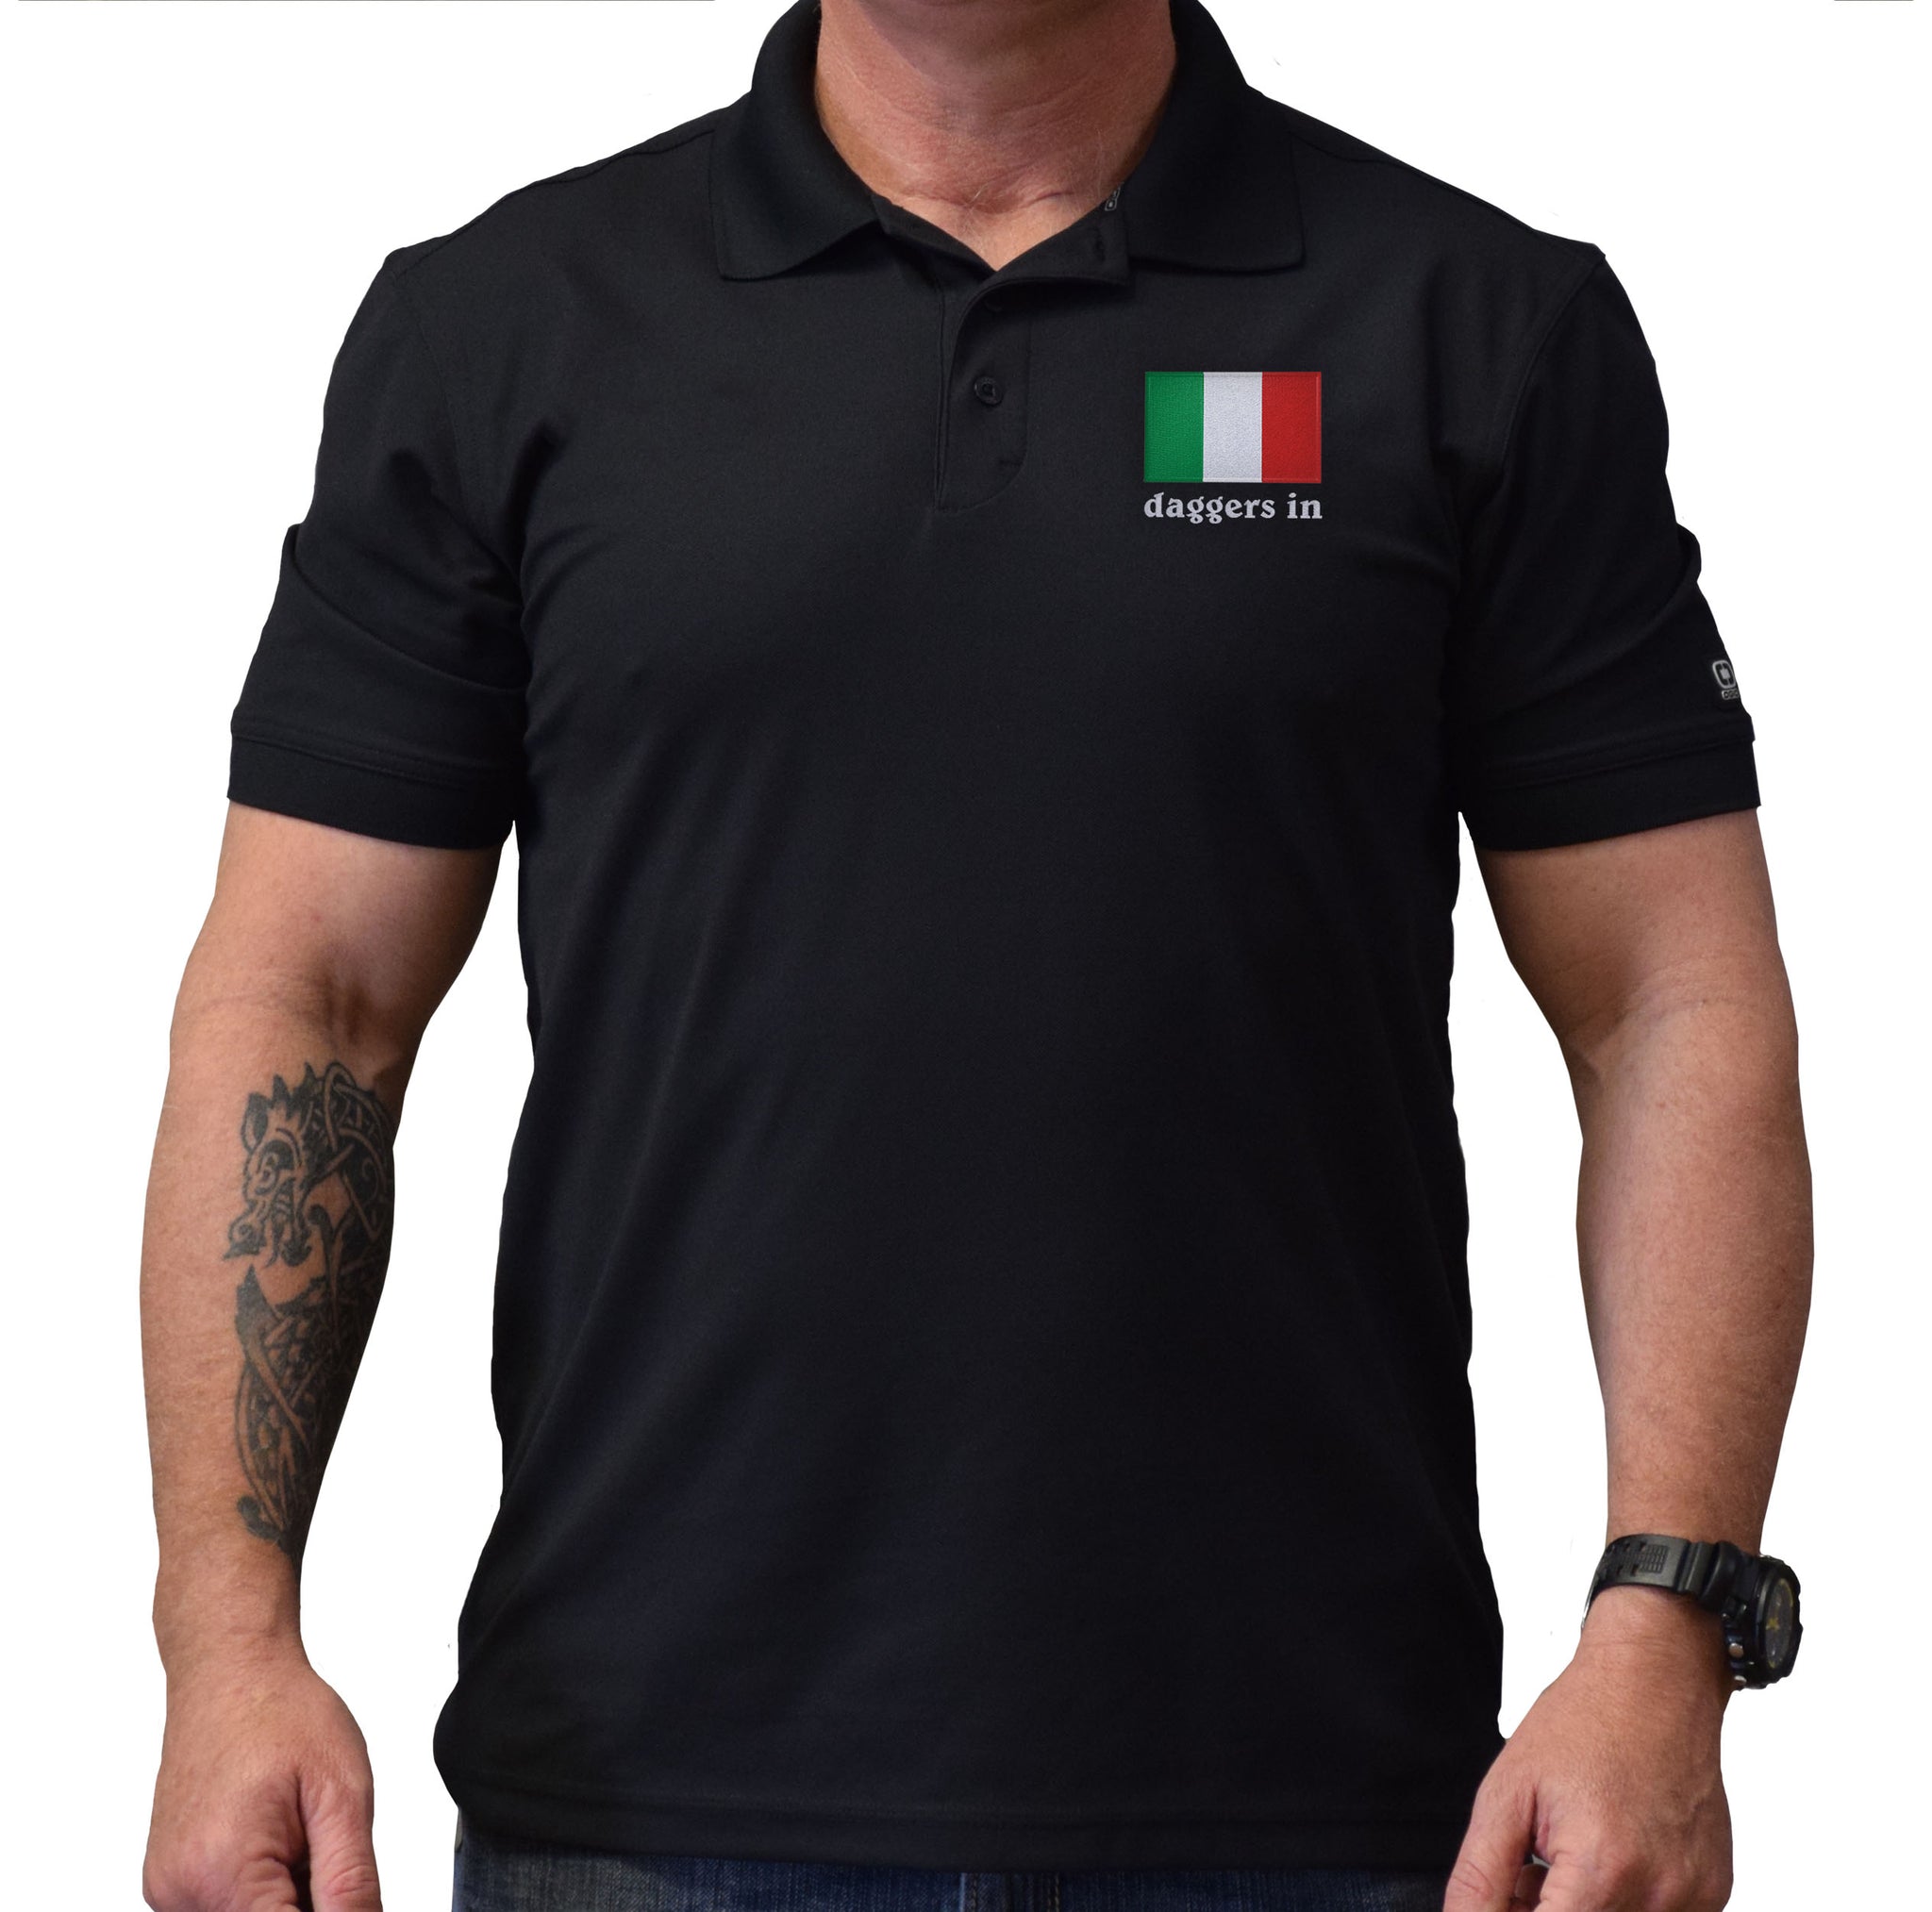 "Daggers In" Italian Flag Embroidered Polo